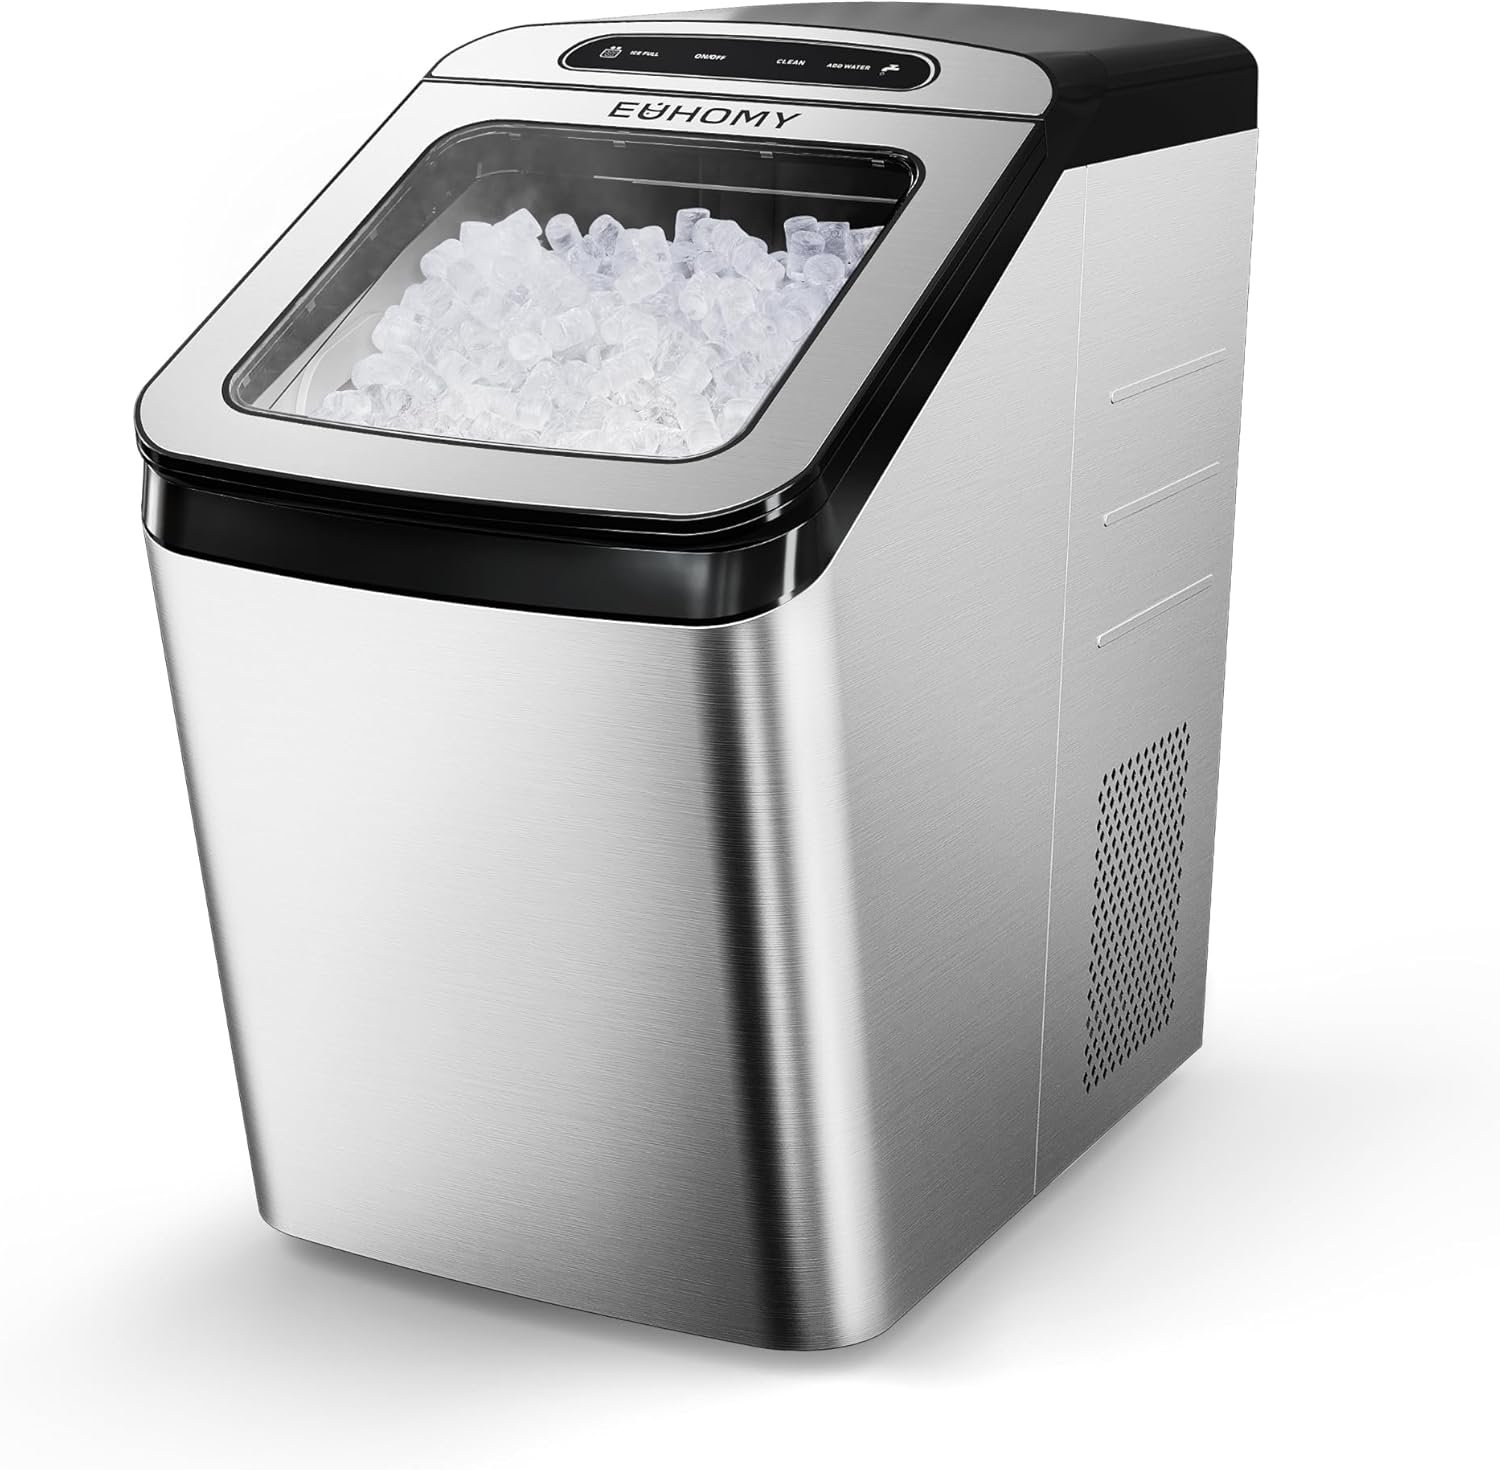 EUHOMY Nugget Ice Maker Review